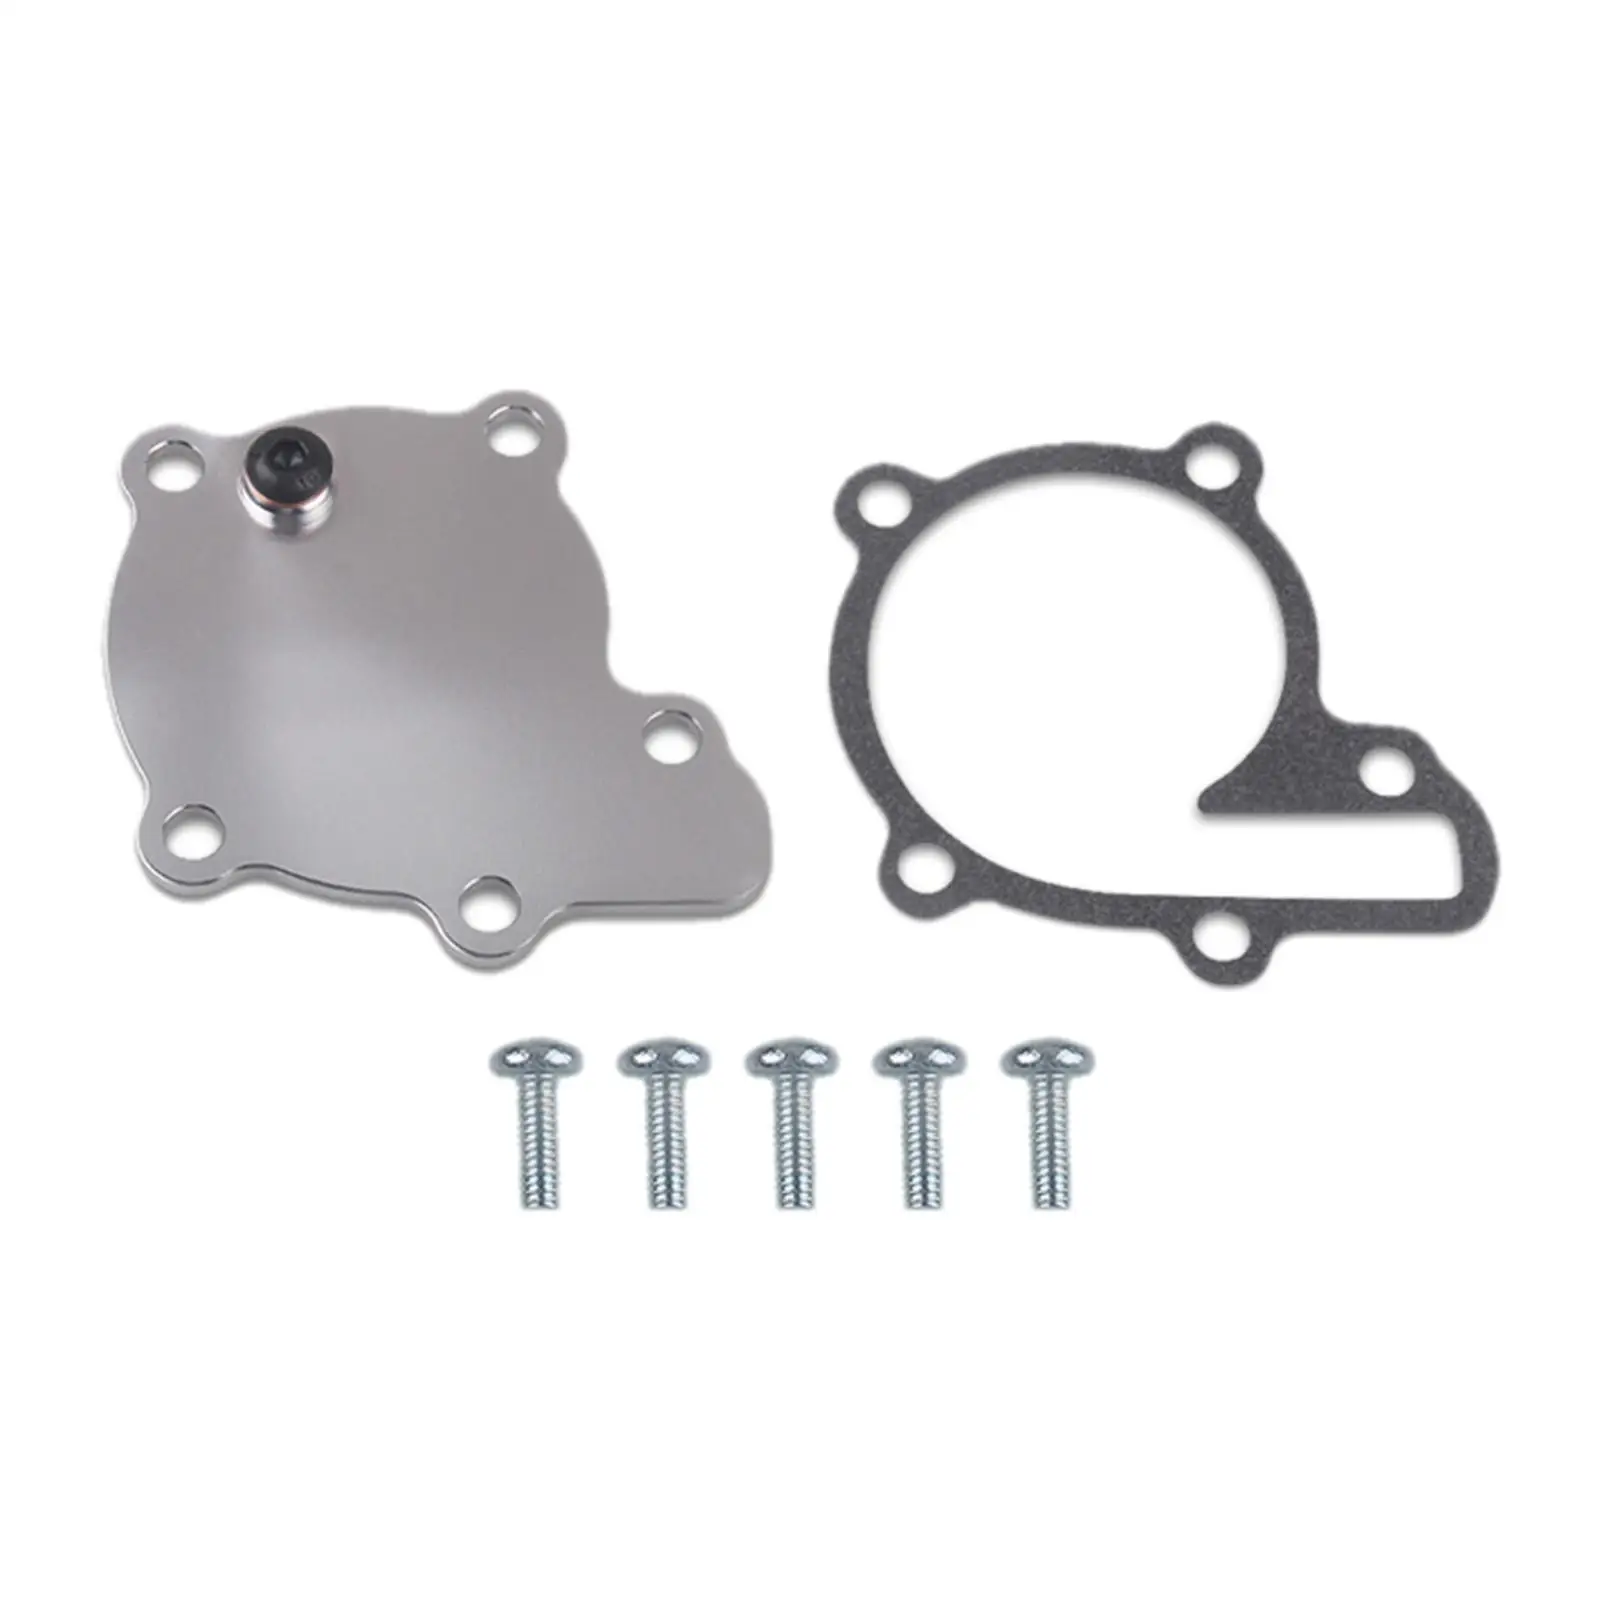 Practical  Cover Housing W/ Gasket for Banshee 350 1987-2006 Parts  Replacement